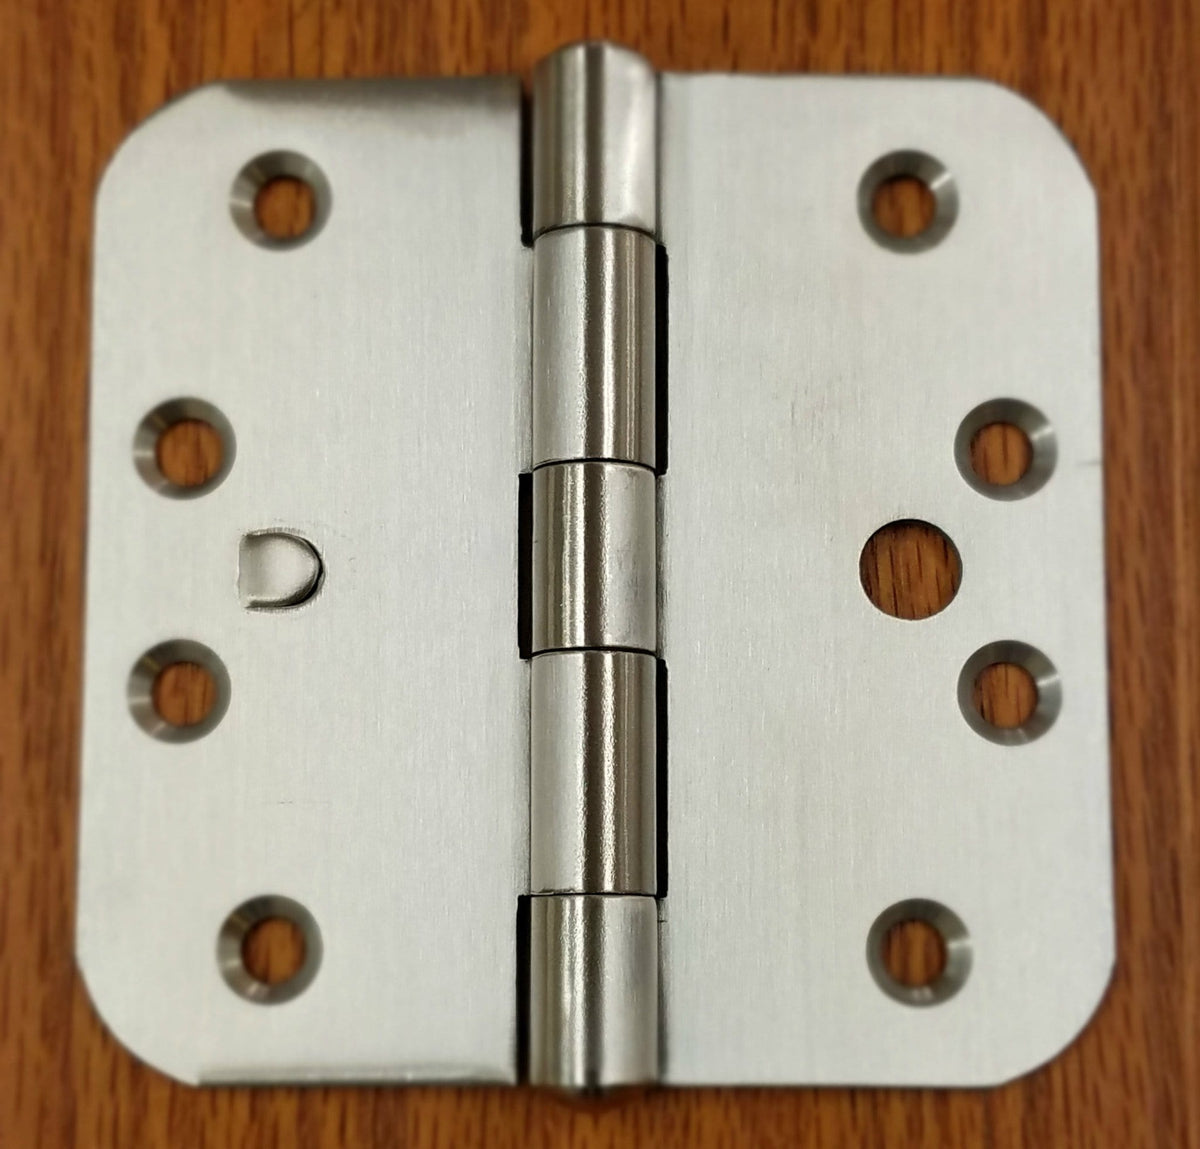 Stainless Steel Hinges with Security Tab - 4" x 4"  Plain Bearing Hinge with 5/8" Radius Corners - Arch Hole Pattern - 2 Pack - Stainless Steel Hinges